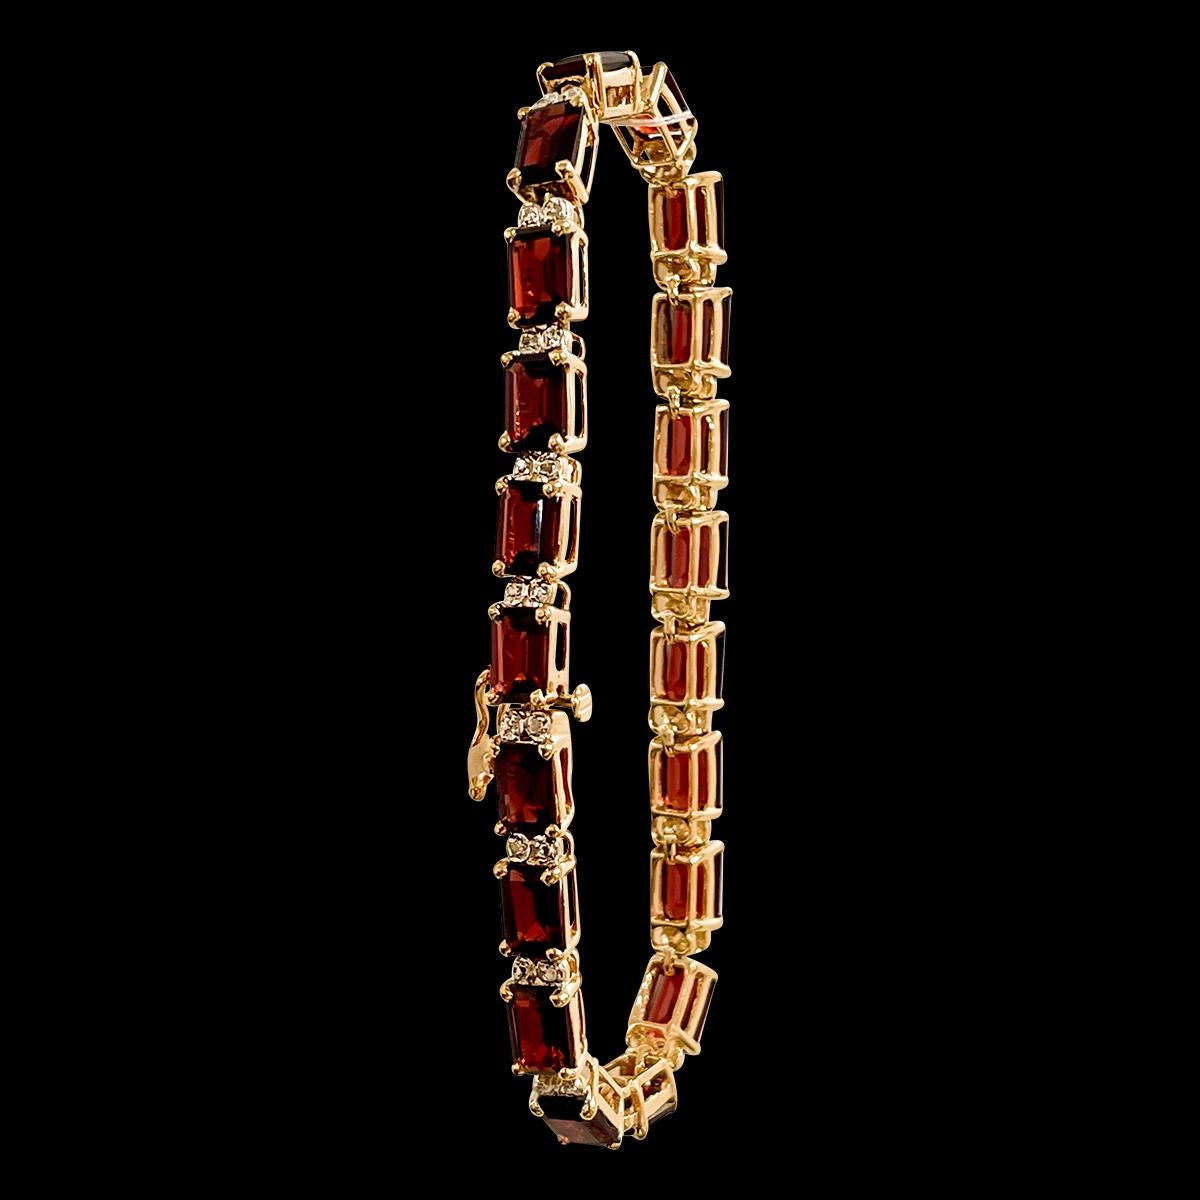  Approximately 20 Carat Natural Emerald cut Garnet & Diamond Tennis Bracelet 14 Karat Yellow Gold .
 This exceptionally affordable Tennis  bracelet has 20  stones of emerald cut   Garnet . Each Garnet is separated by two tony diamonds . Total weight